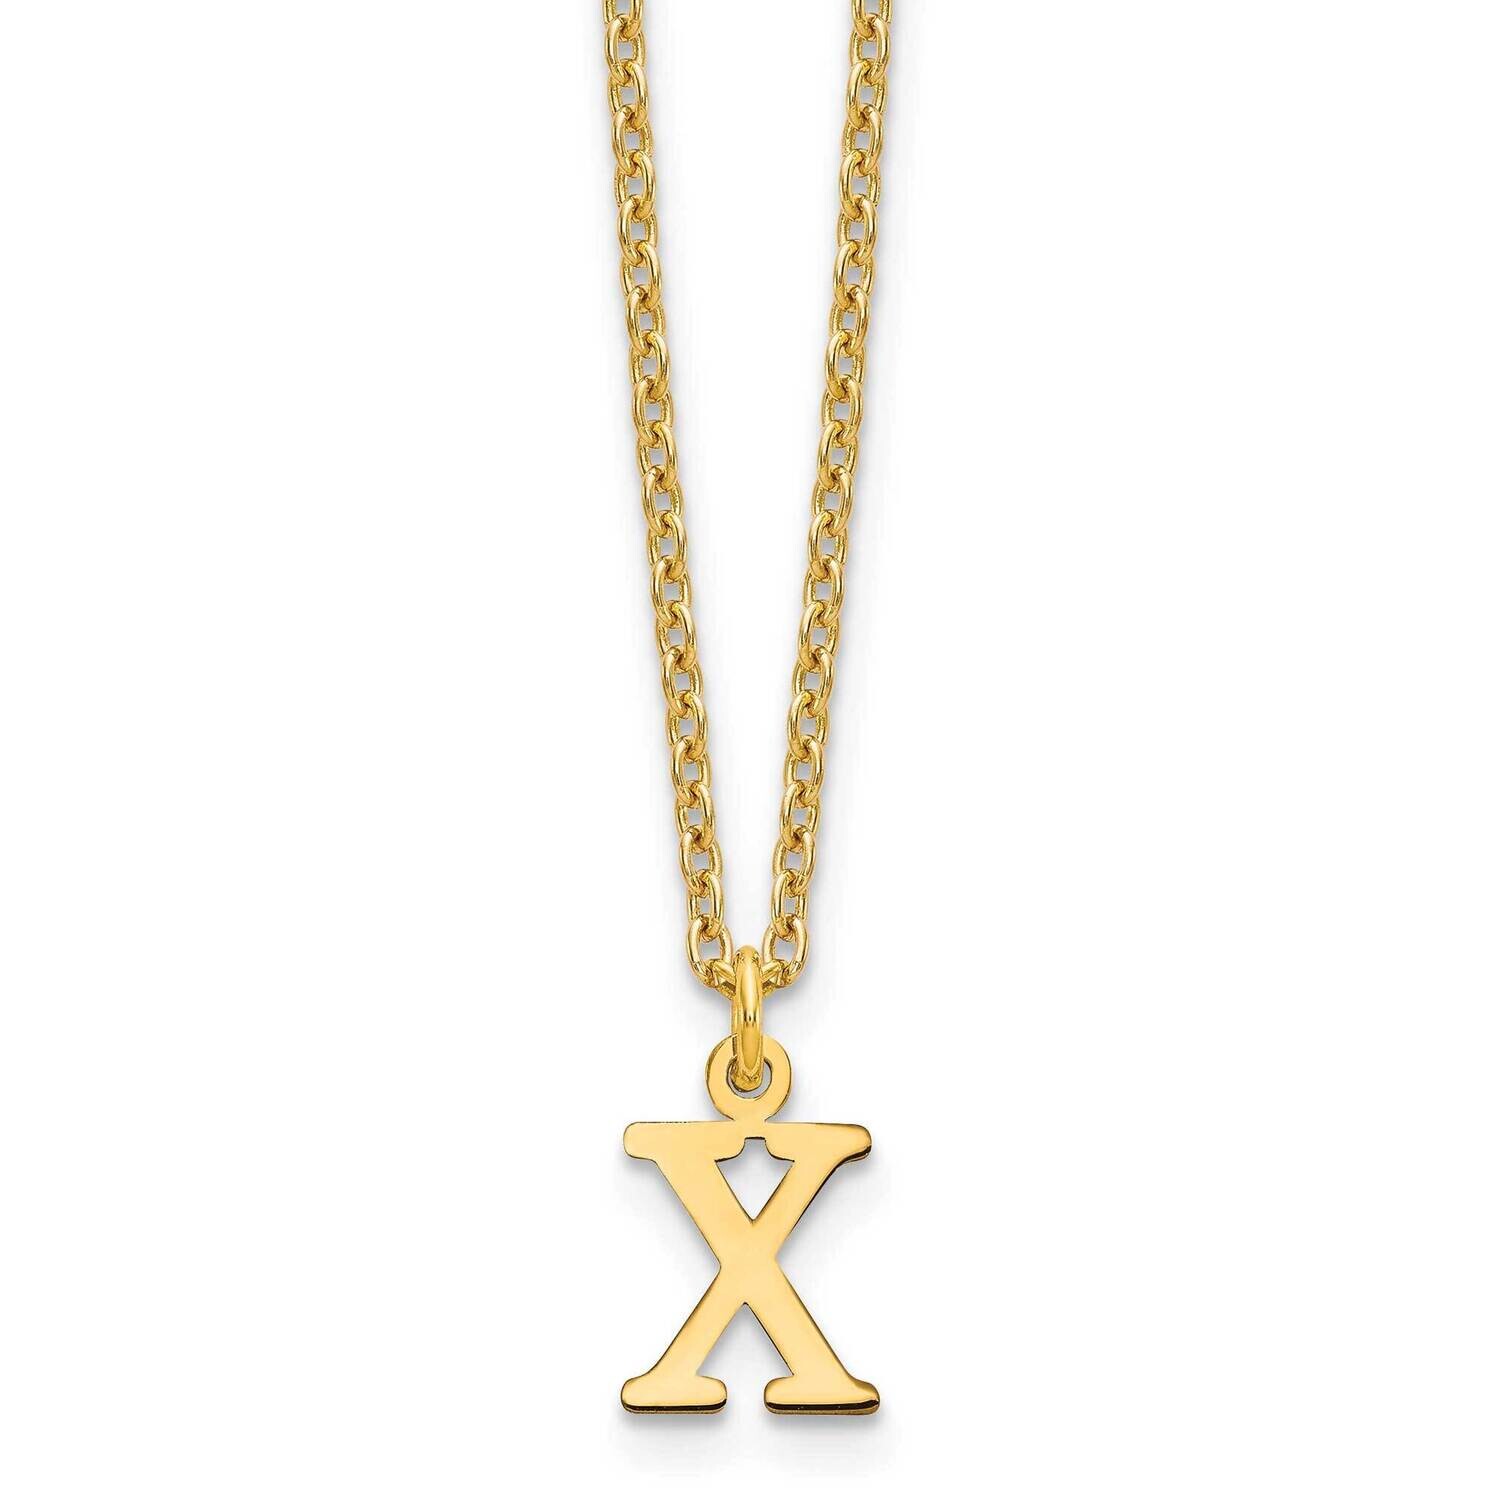 Gold-Plated Cutout Letter X Initial Necklace Sterling Silver XNA727GP/X